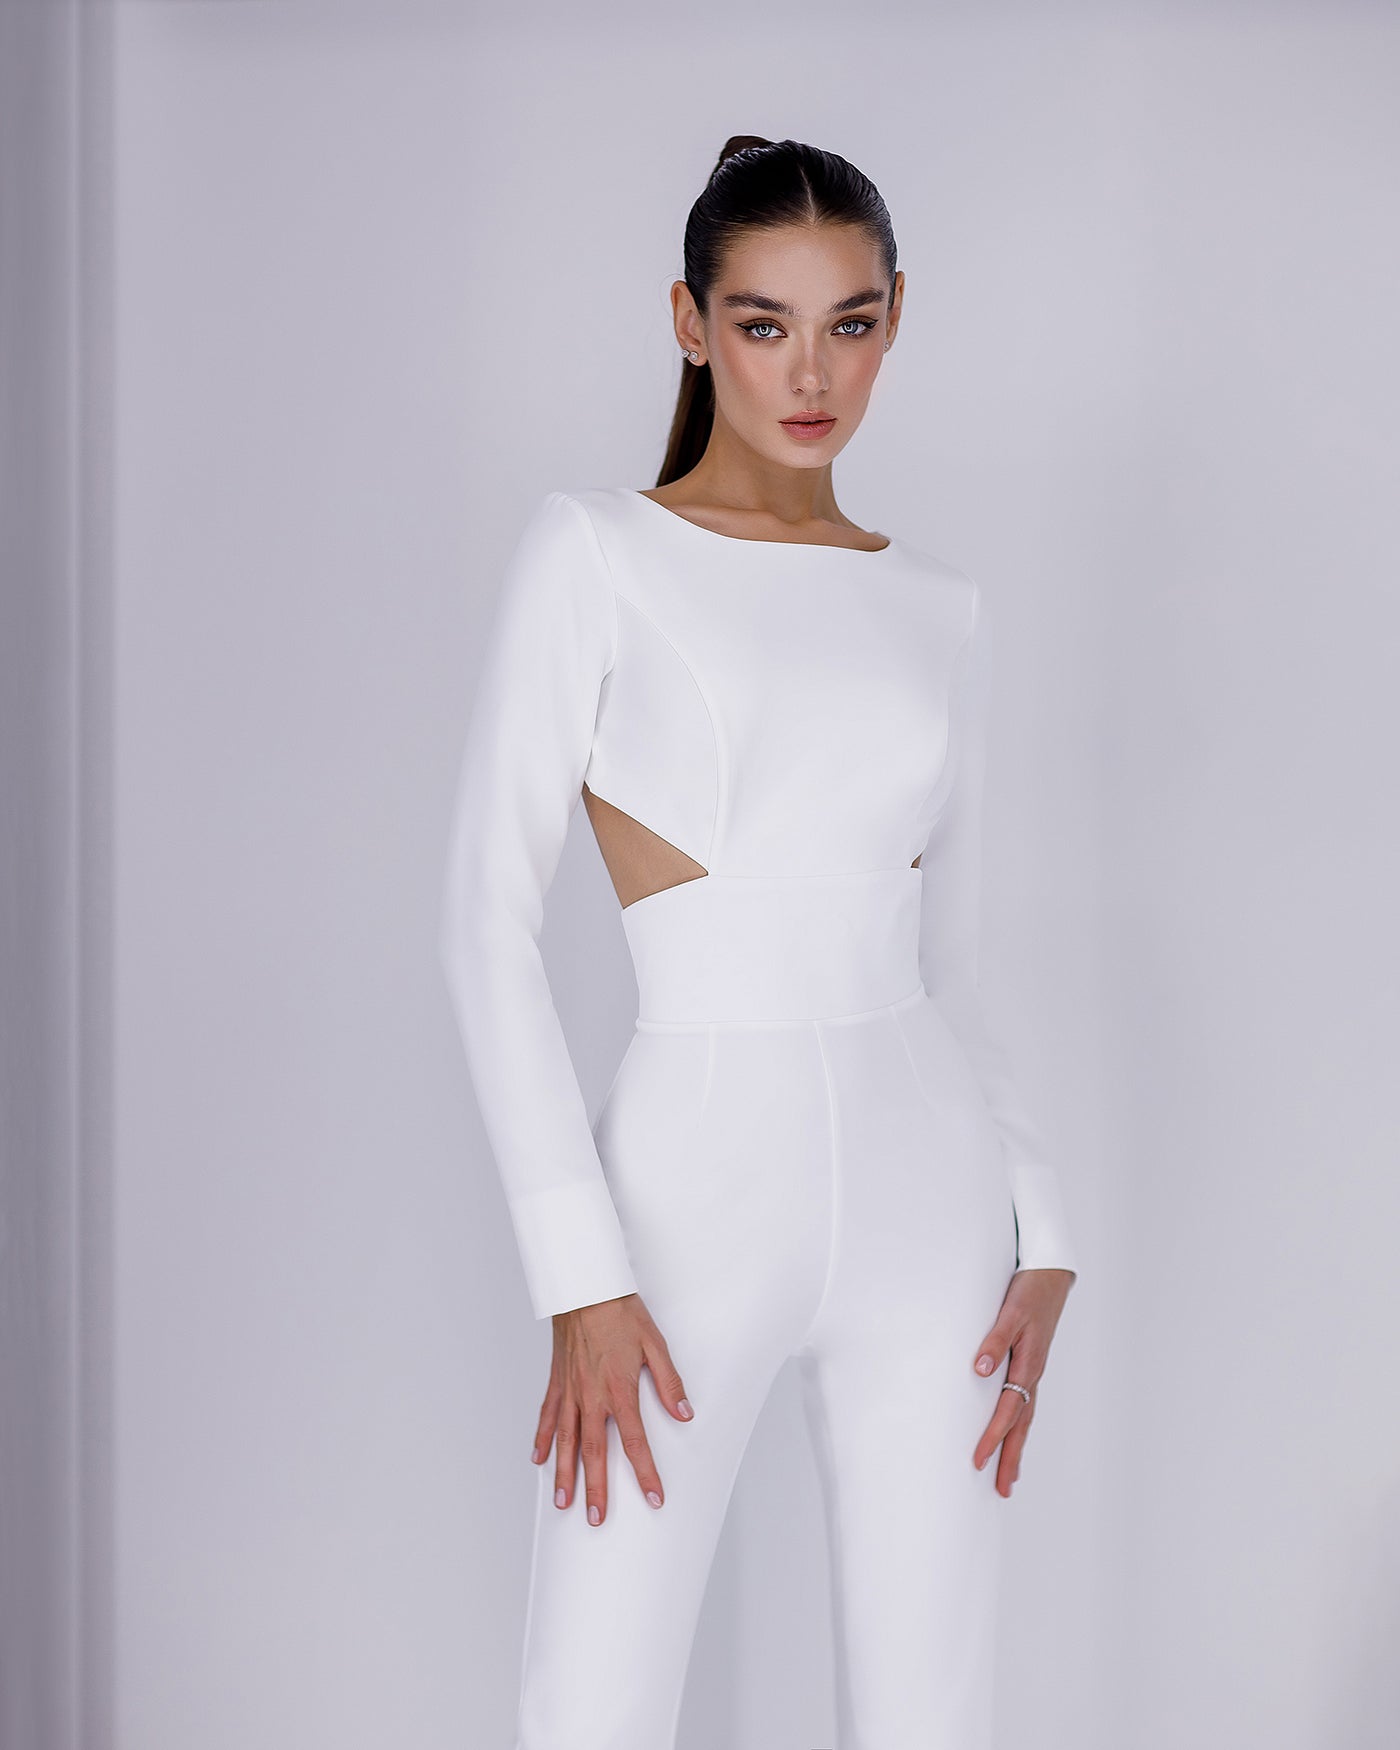 White BACKLESS CUT-OUT LONG-SLEEVE JUMPSUIT (ARTICLE 422)